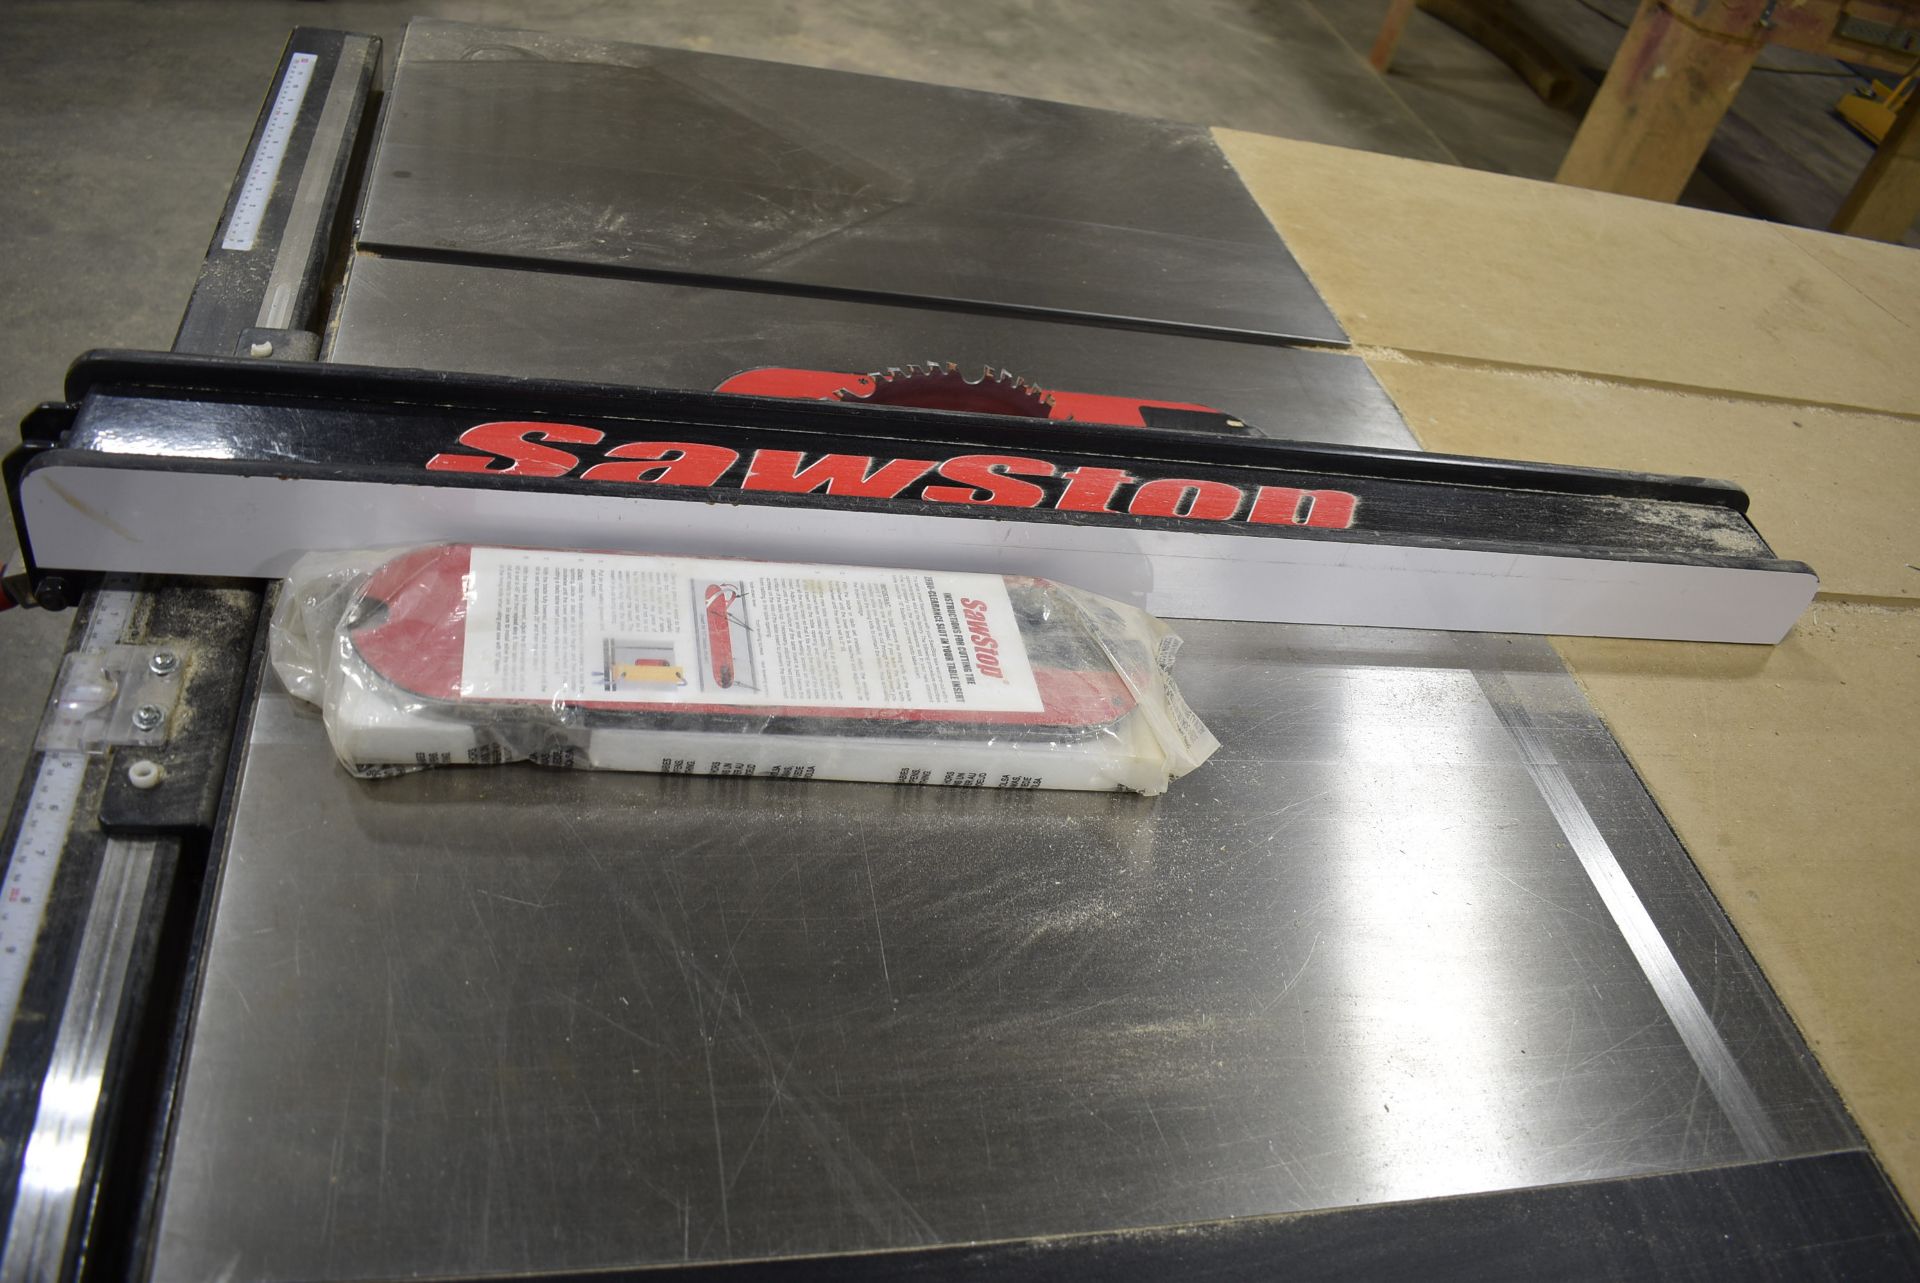 SAWSTOP ICS31230 10" INDUSTRIAL CABINET SAW WITH 3 HP MOTOR, SPEEDS TO 4,000 RPM, S/N I170300103 ( - Image 3 of 6